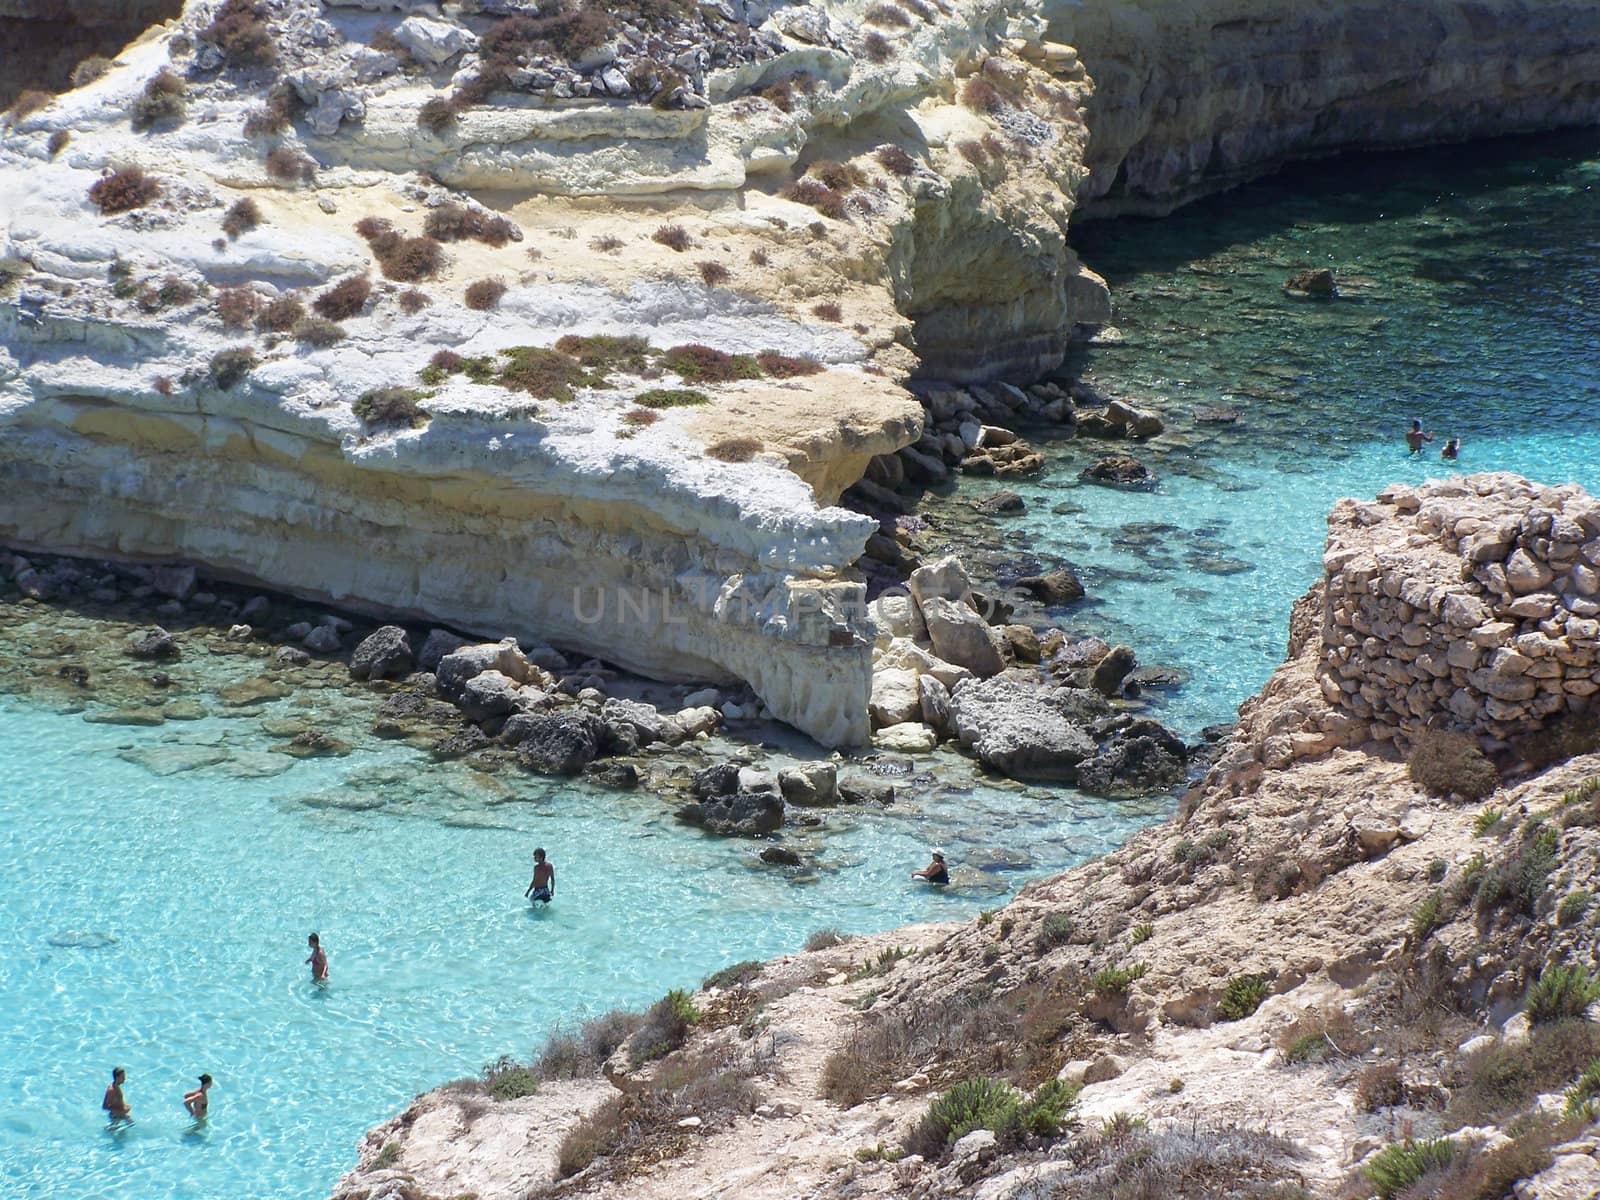 This is the magnificent island of rabbits, in Lampedusa. The water is crystal clear and the sand is white. The rocks are silhouetted against the blue sea and the sky is clear. The depths of this island are a paradise for divers because they are full of colorful fish. 
In this beach nesting turtles, who do travel miles to come to lay their eggs.  This area is protected reserves.